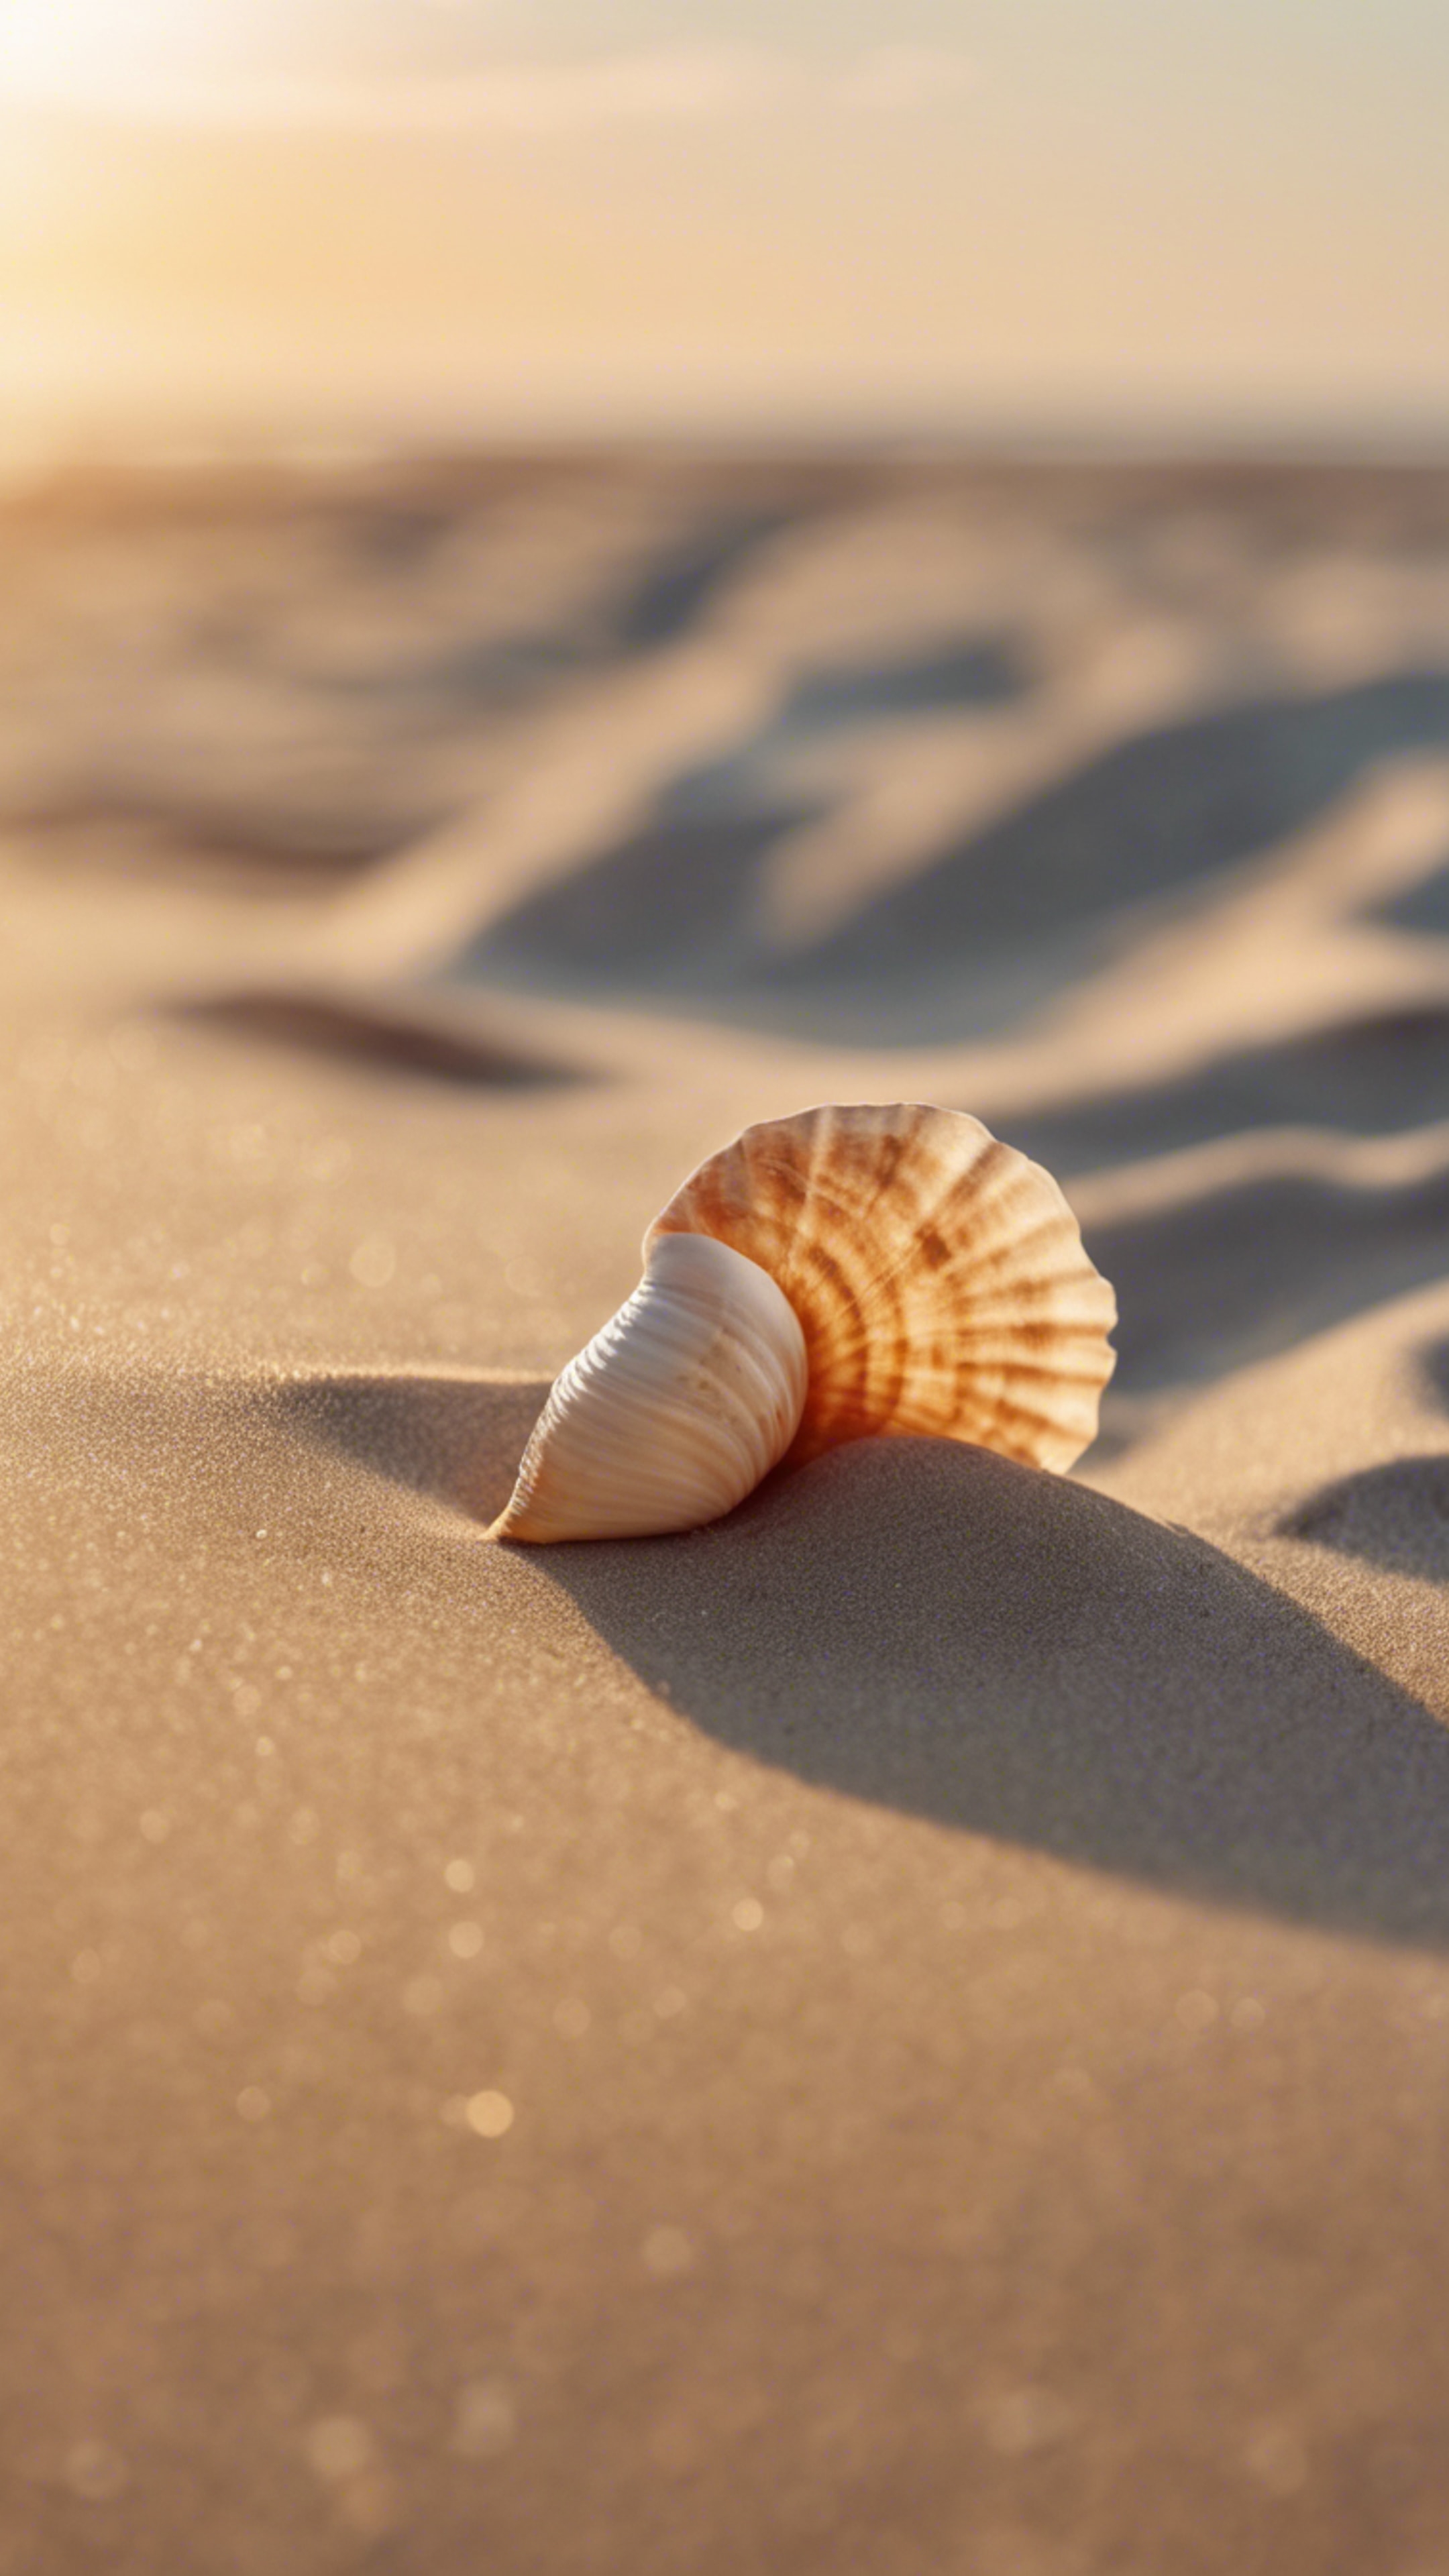 A sandy beach at sunrise, with a lonely seashell on the smooth, cool beige sand. Tapéta[f397365f3b8642f18a02]